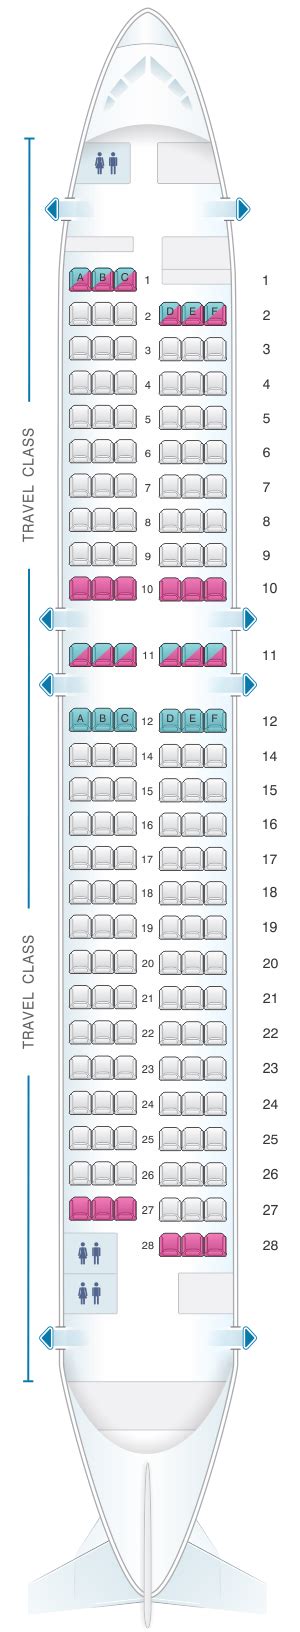 Seat Map Asiana Airlines Airbus A320 200 156pax